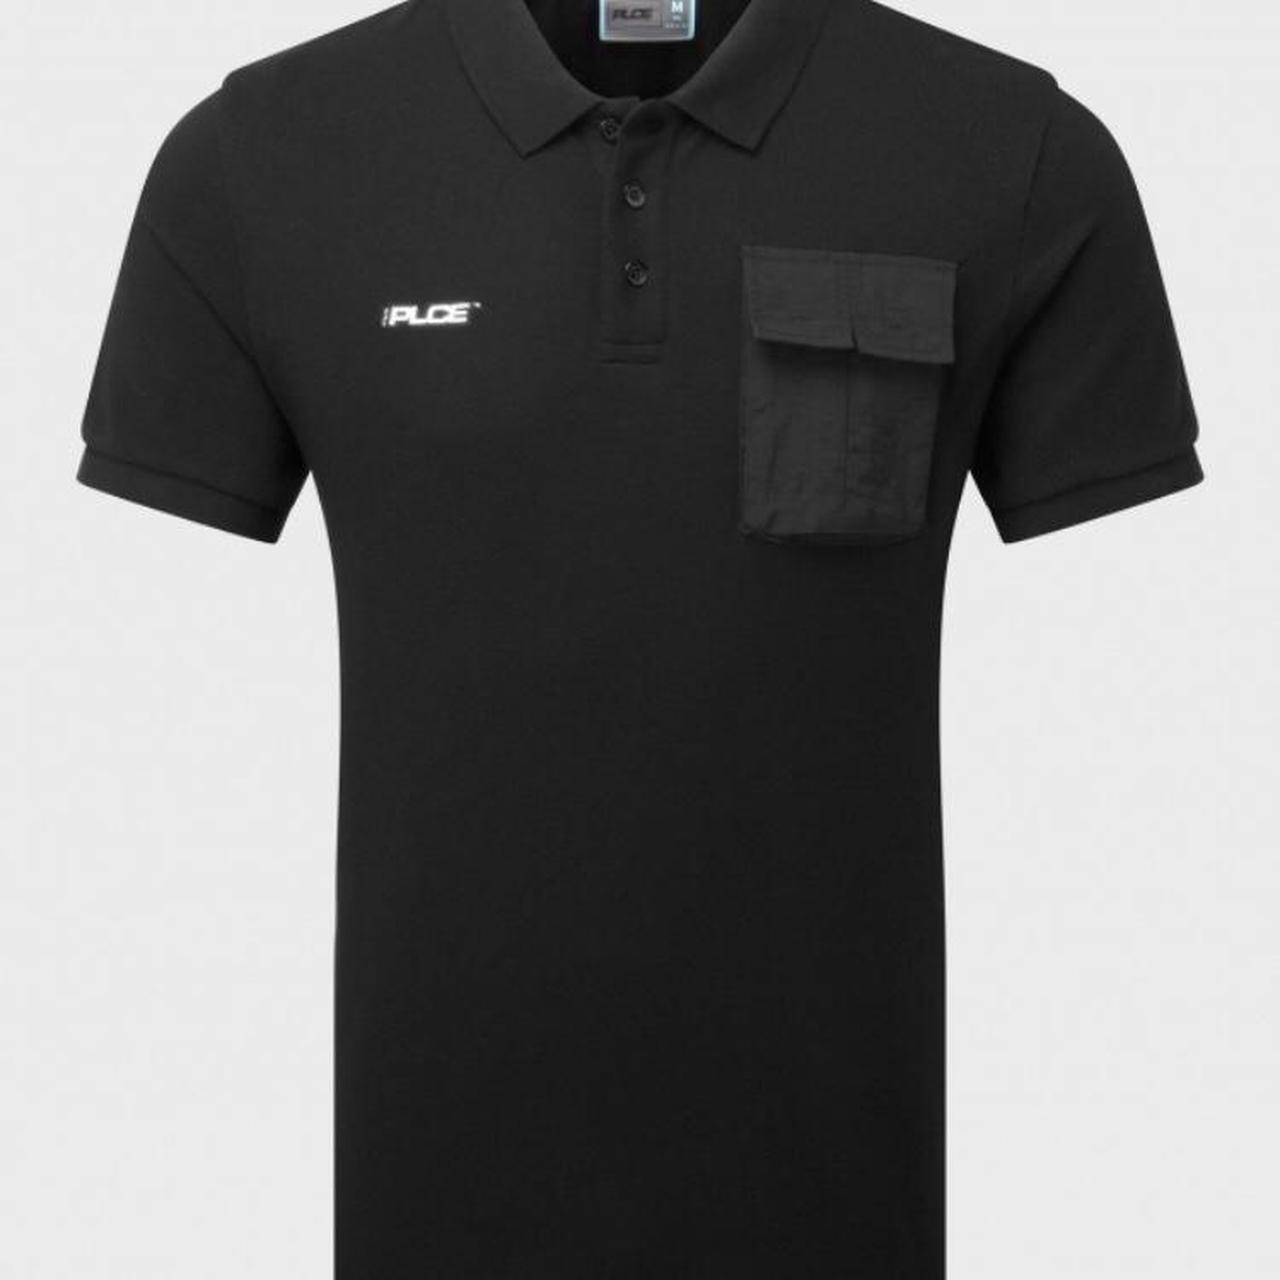 Product Image 1 - 883 POLICE

Orbin Black Polo Shirt

Part